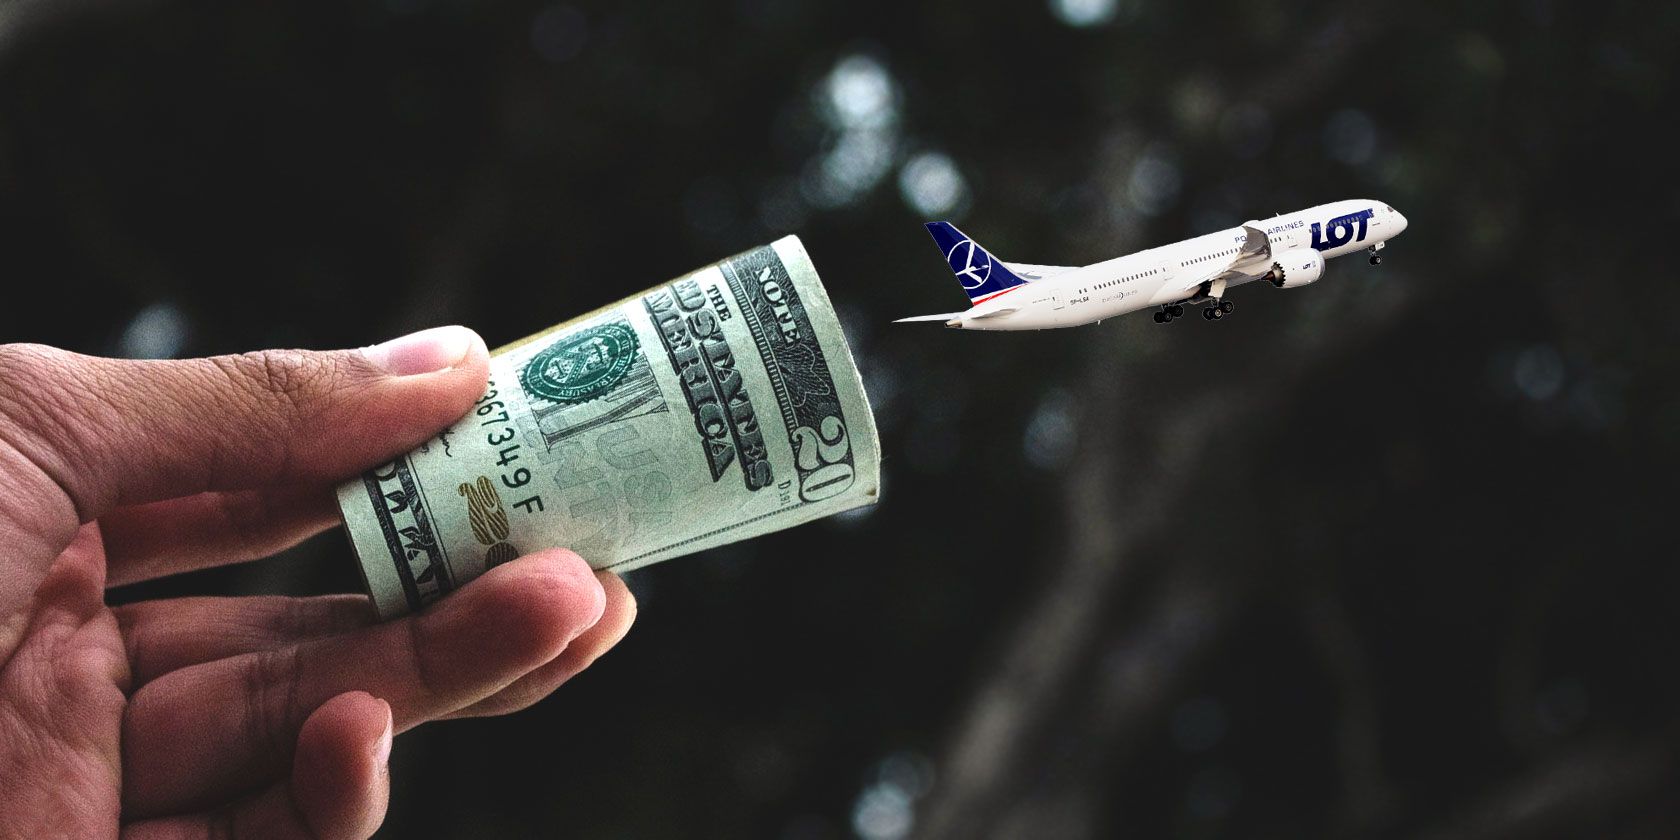 Cheap airlines: How to find the best deals and save money on your next flight